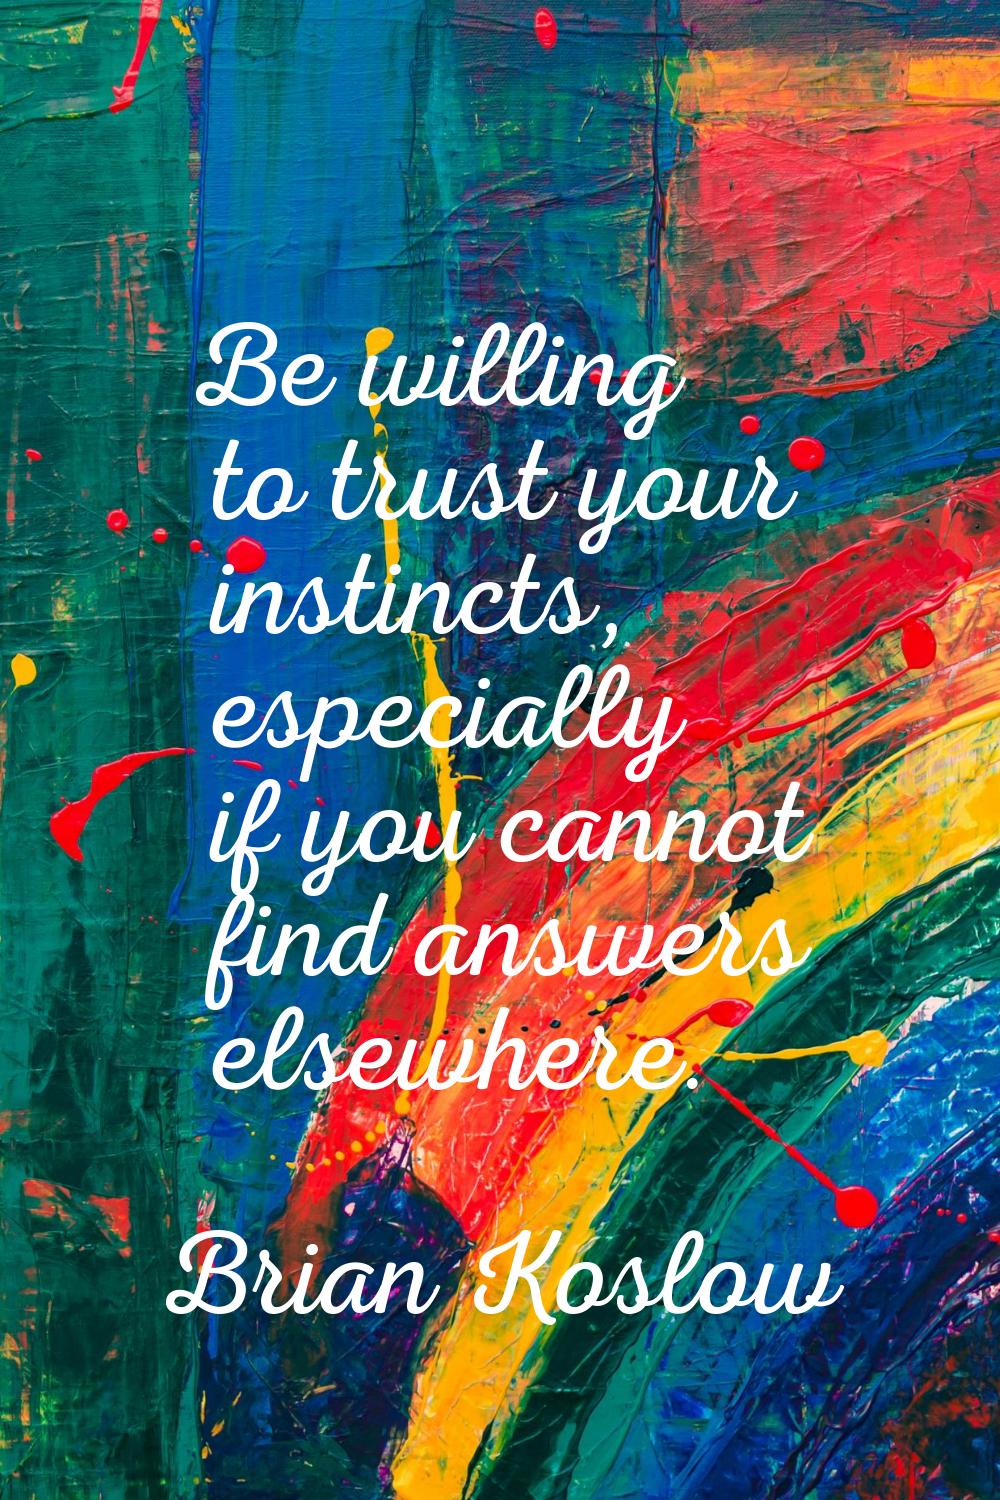 Be willing to trust your instincts, especially if you cannot find answers elsewhere.